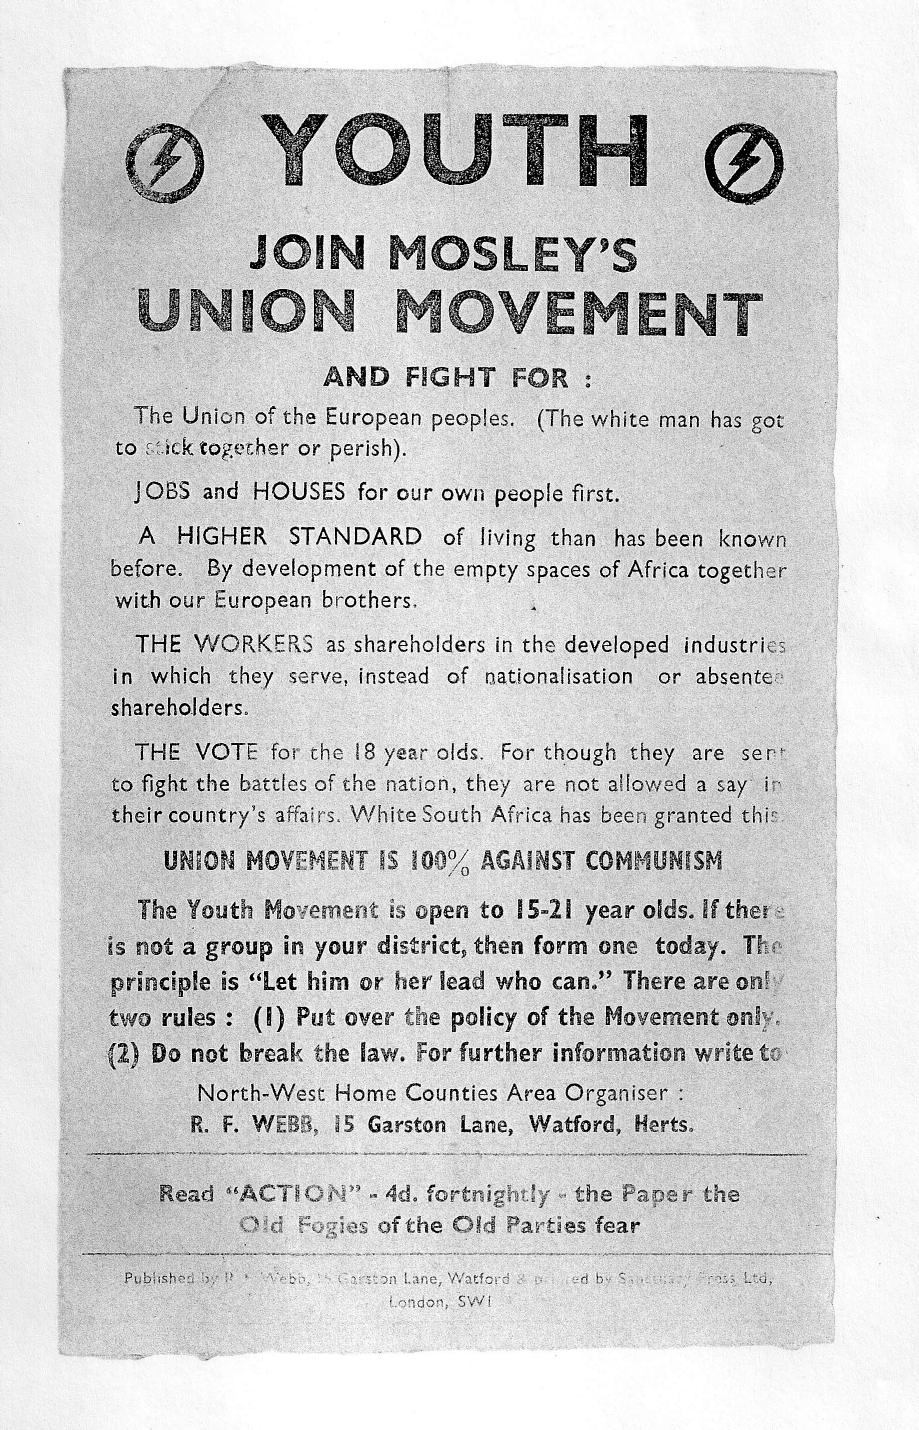 Union Movement by Election Material